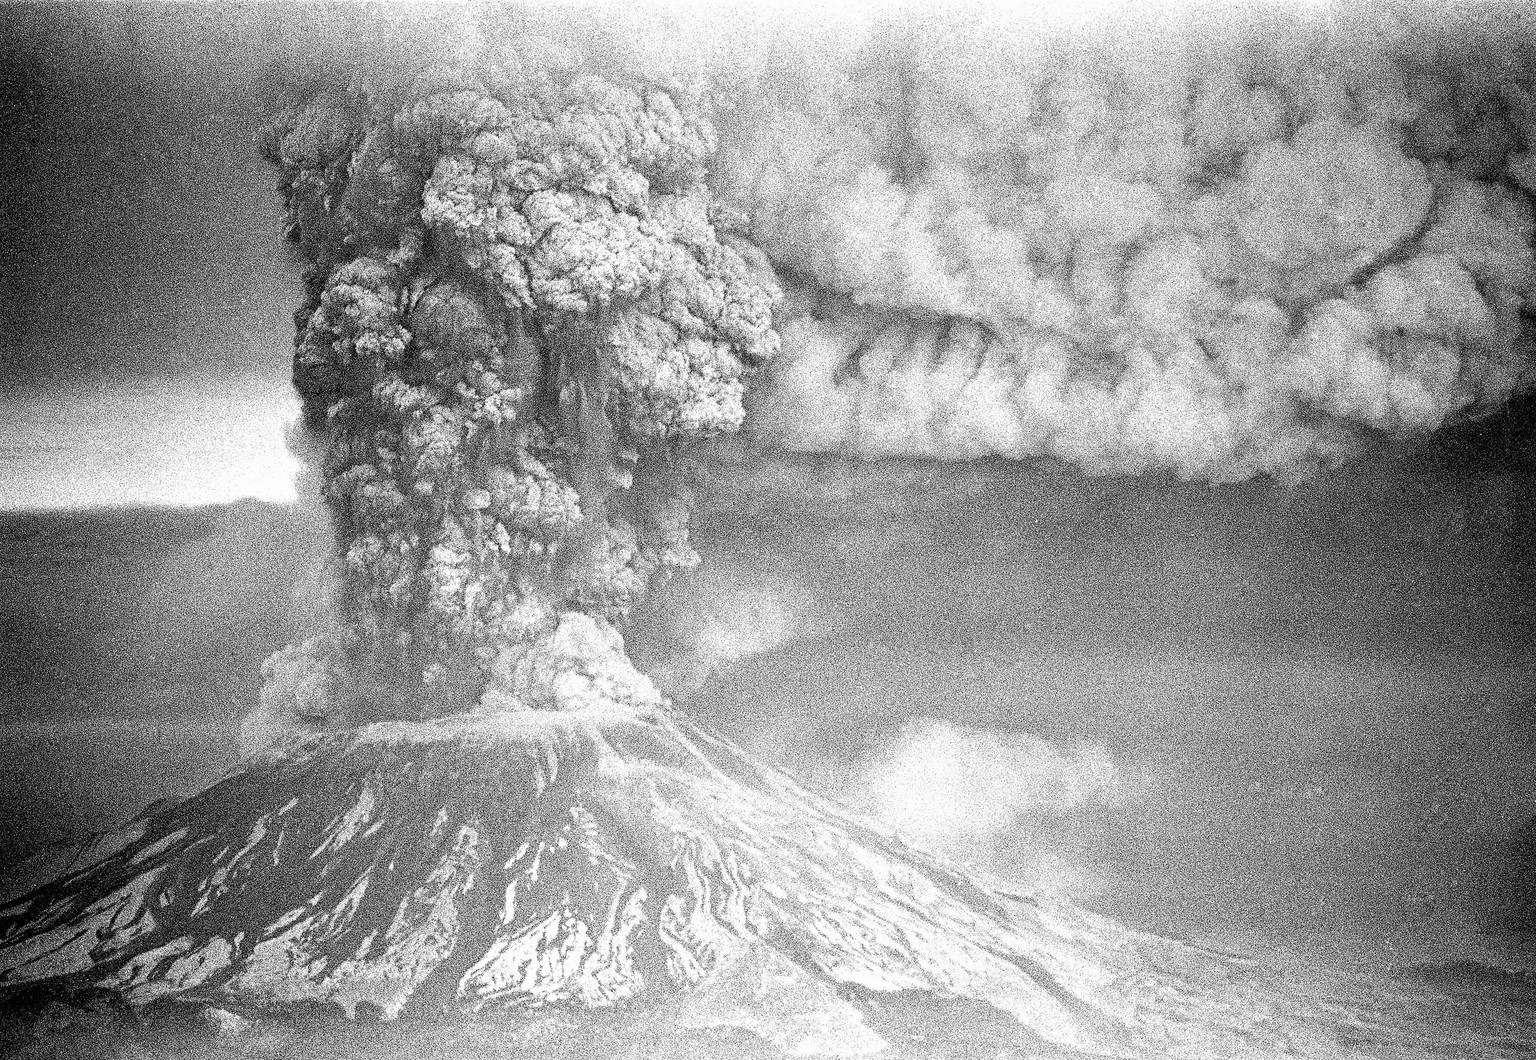 FILE - In this May 18, 1980, file photo, Mount St. Helens sends a plume of ash, smoke and debris skyward as it erupts. May 18, 2020, is the 40th anniversary of the eruption that killed more than 50 pe ...